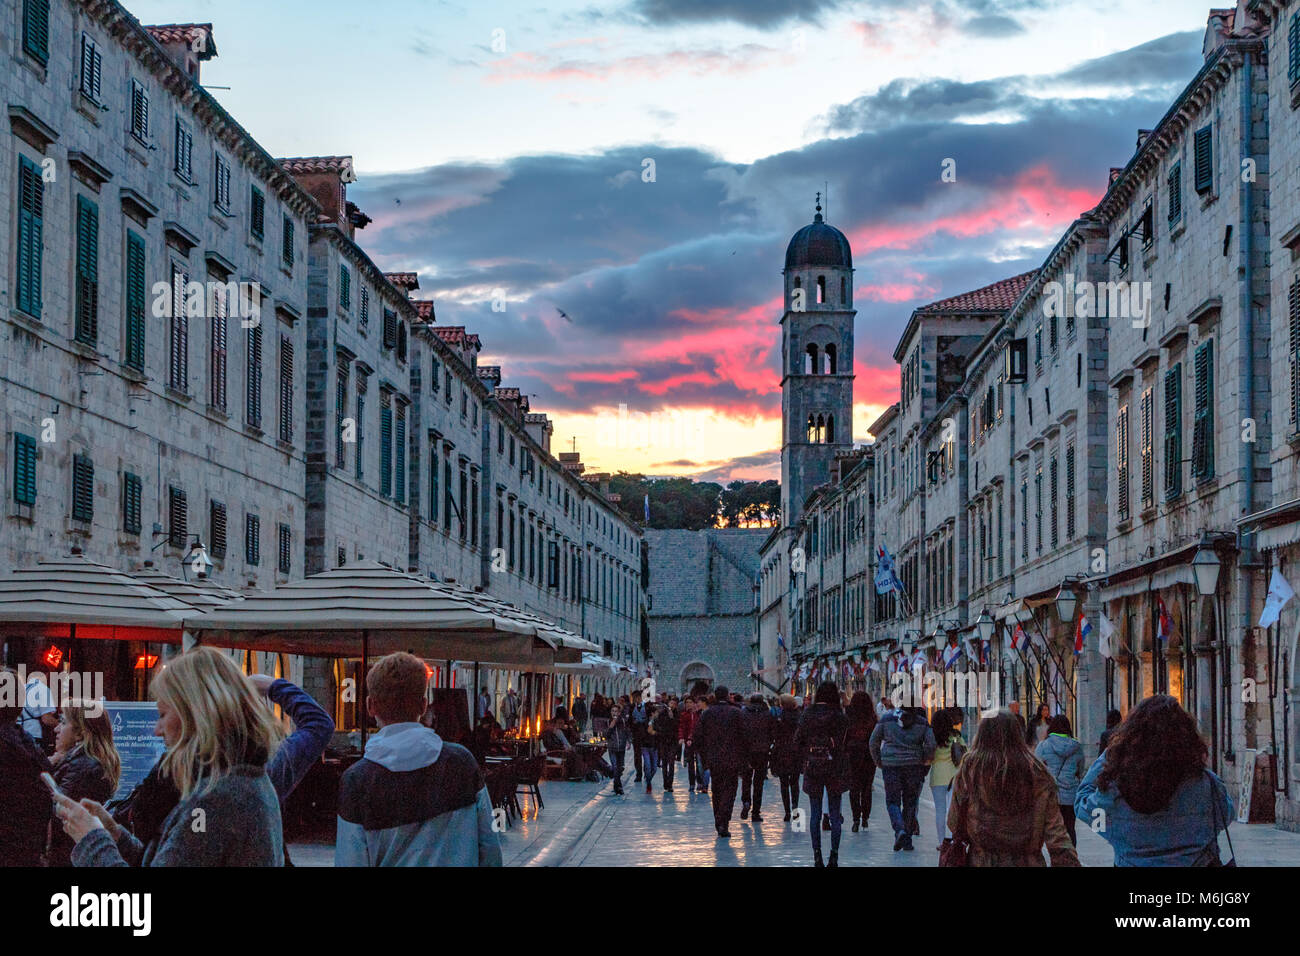 Old town Dubrovnik with a vivid sky at sunset Stock Photo